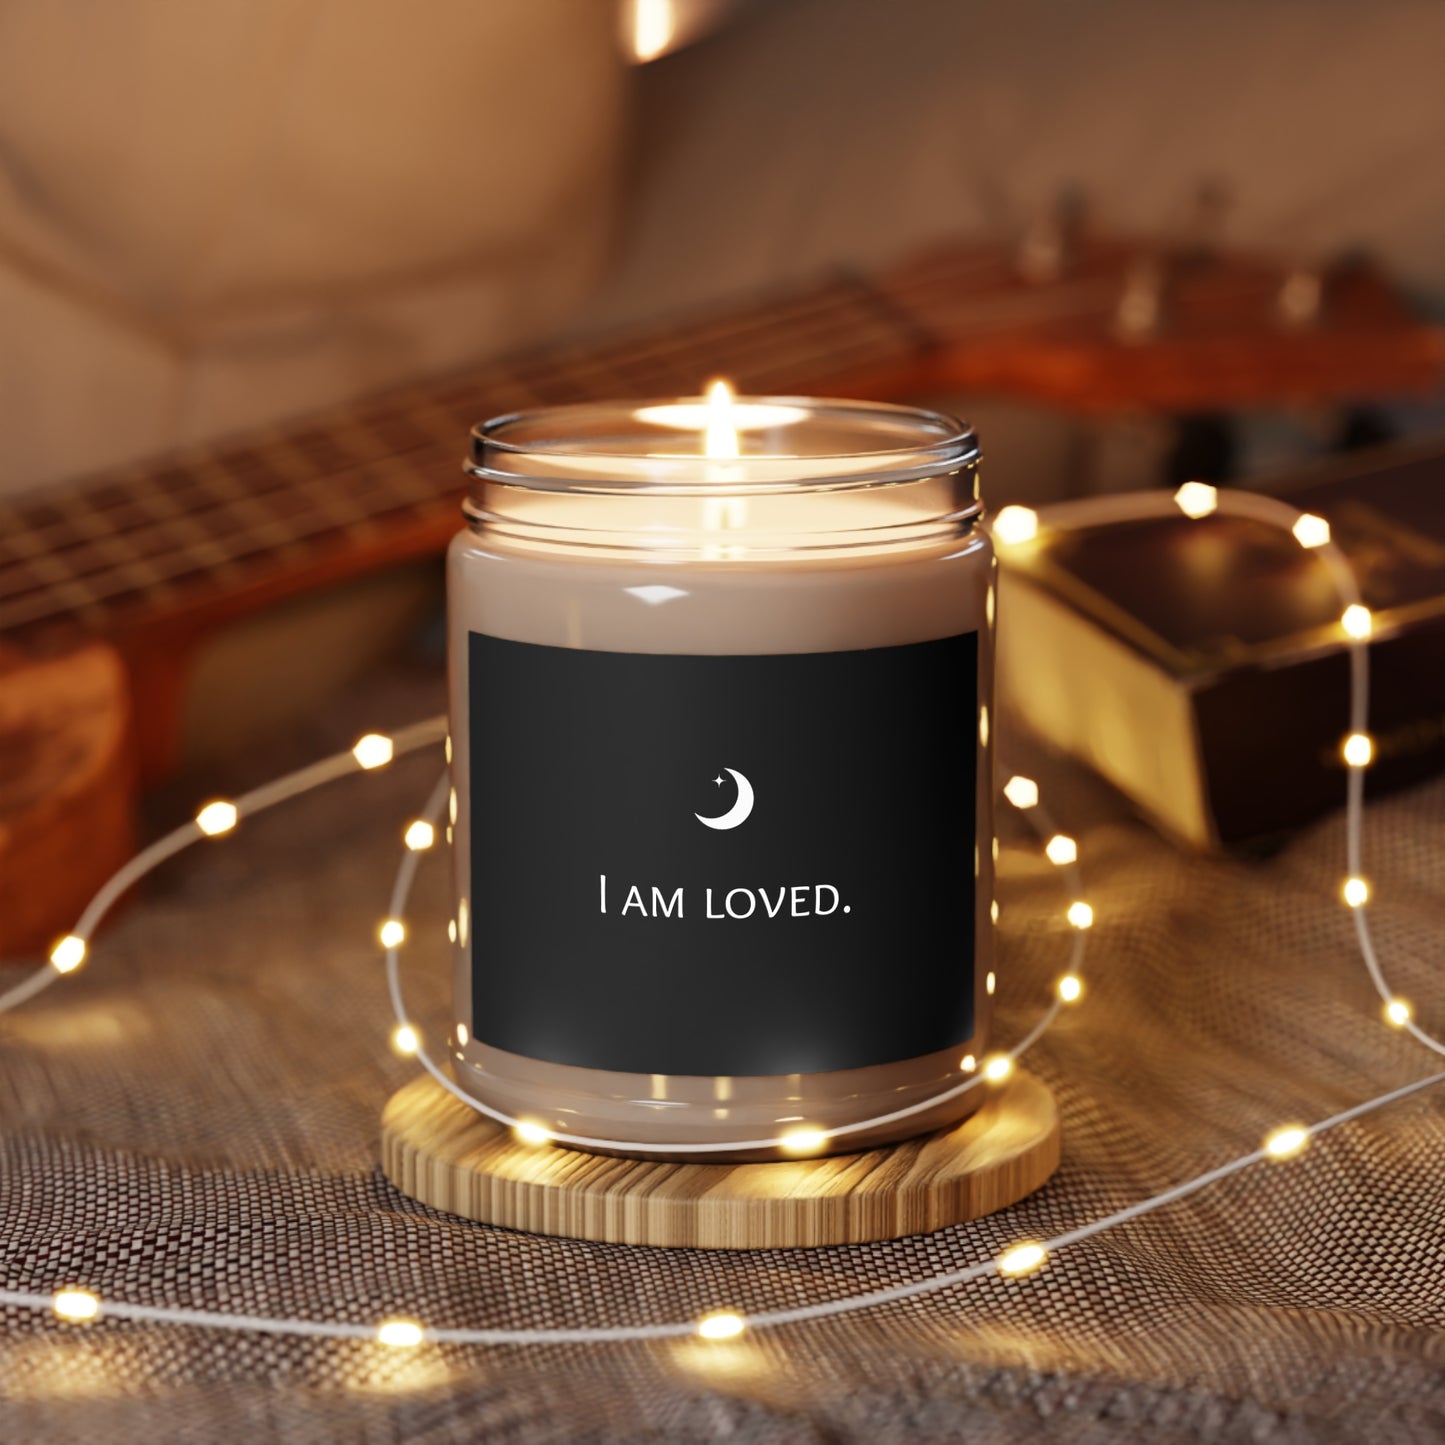 I am Loved. 🔮 Scented Candles, 9oz